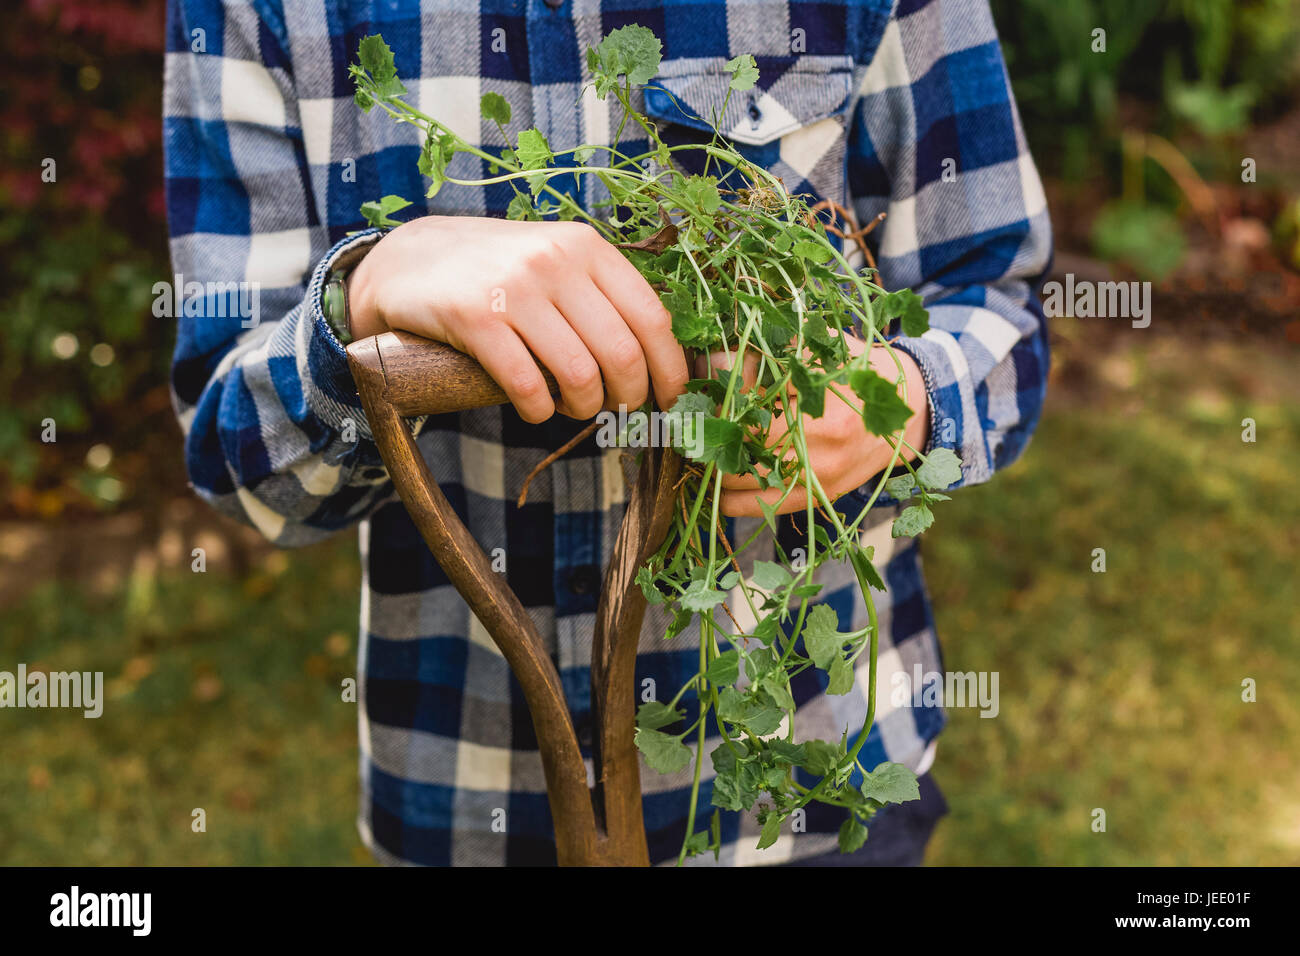 Boy holding a spade and plants Stock Photo